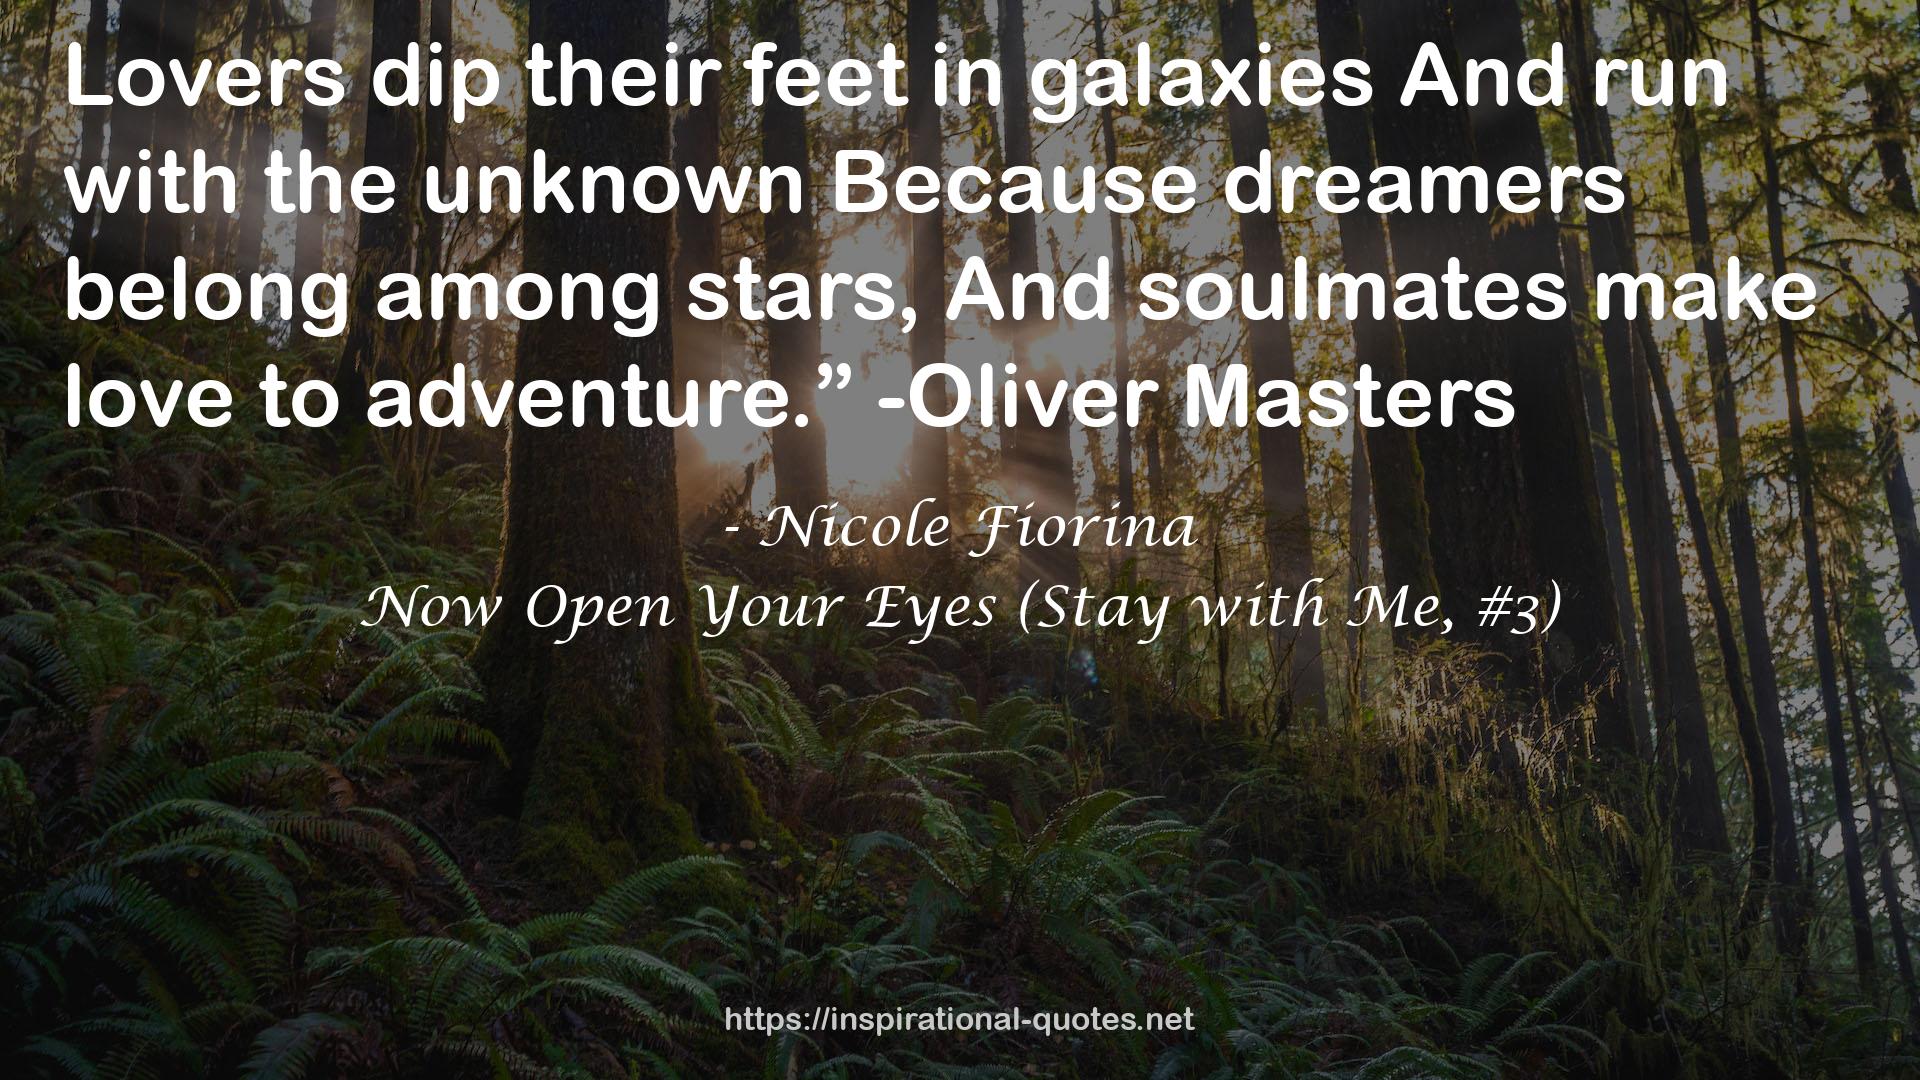 Now Open Your Eyes (Stay with Me, #3) QUOTES